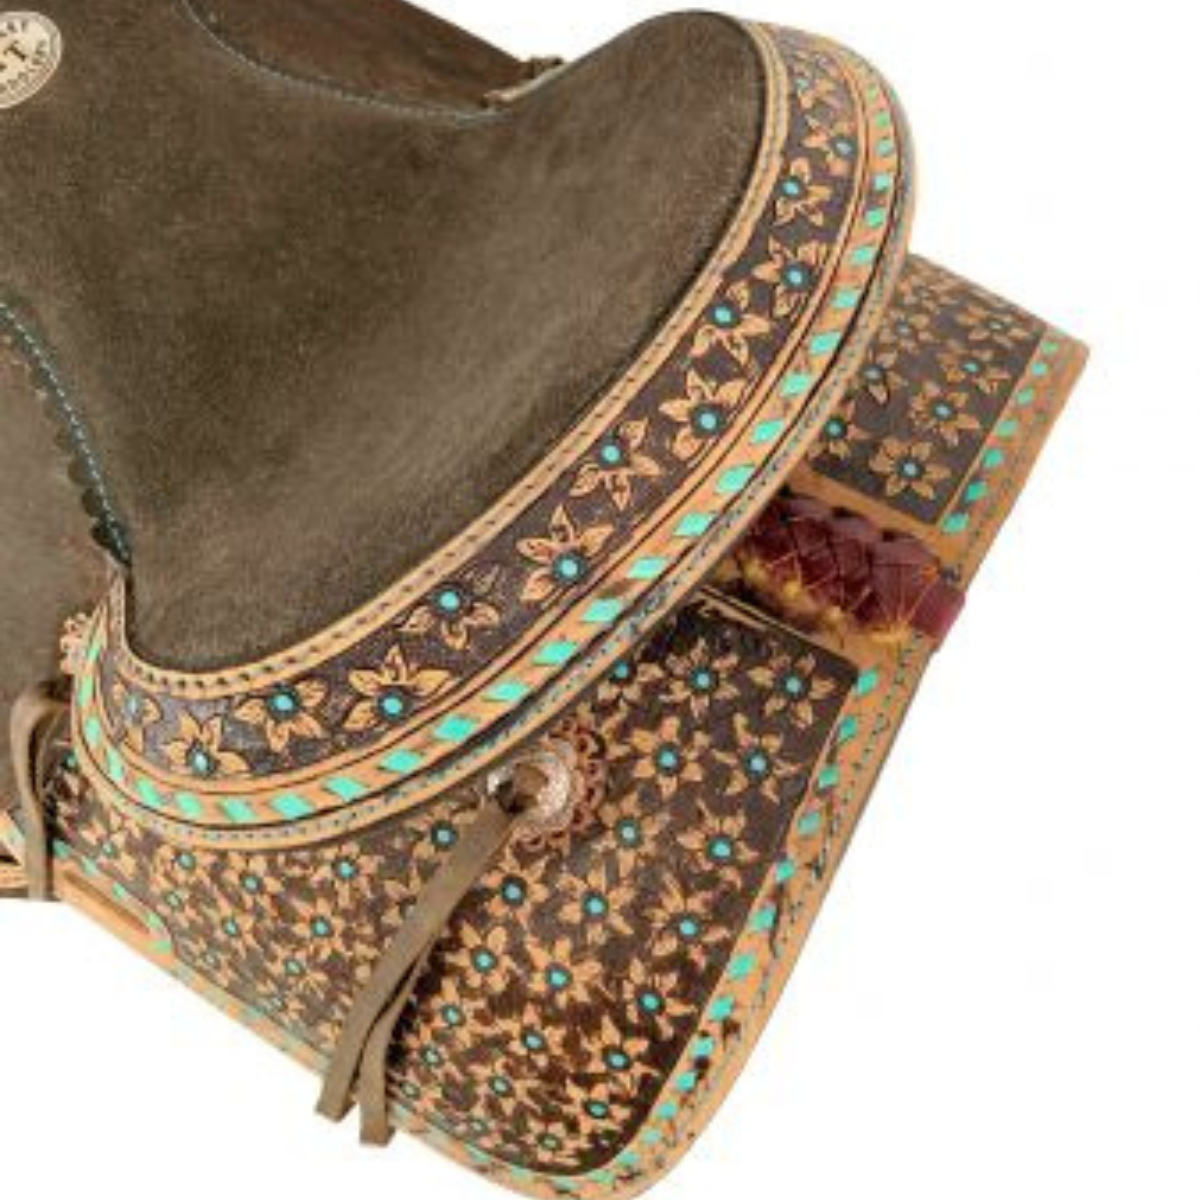 12" Double T Barrel style saddle with Micro Flower tooling and buck stitch - Double T Saddles